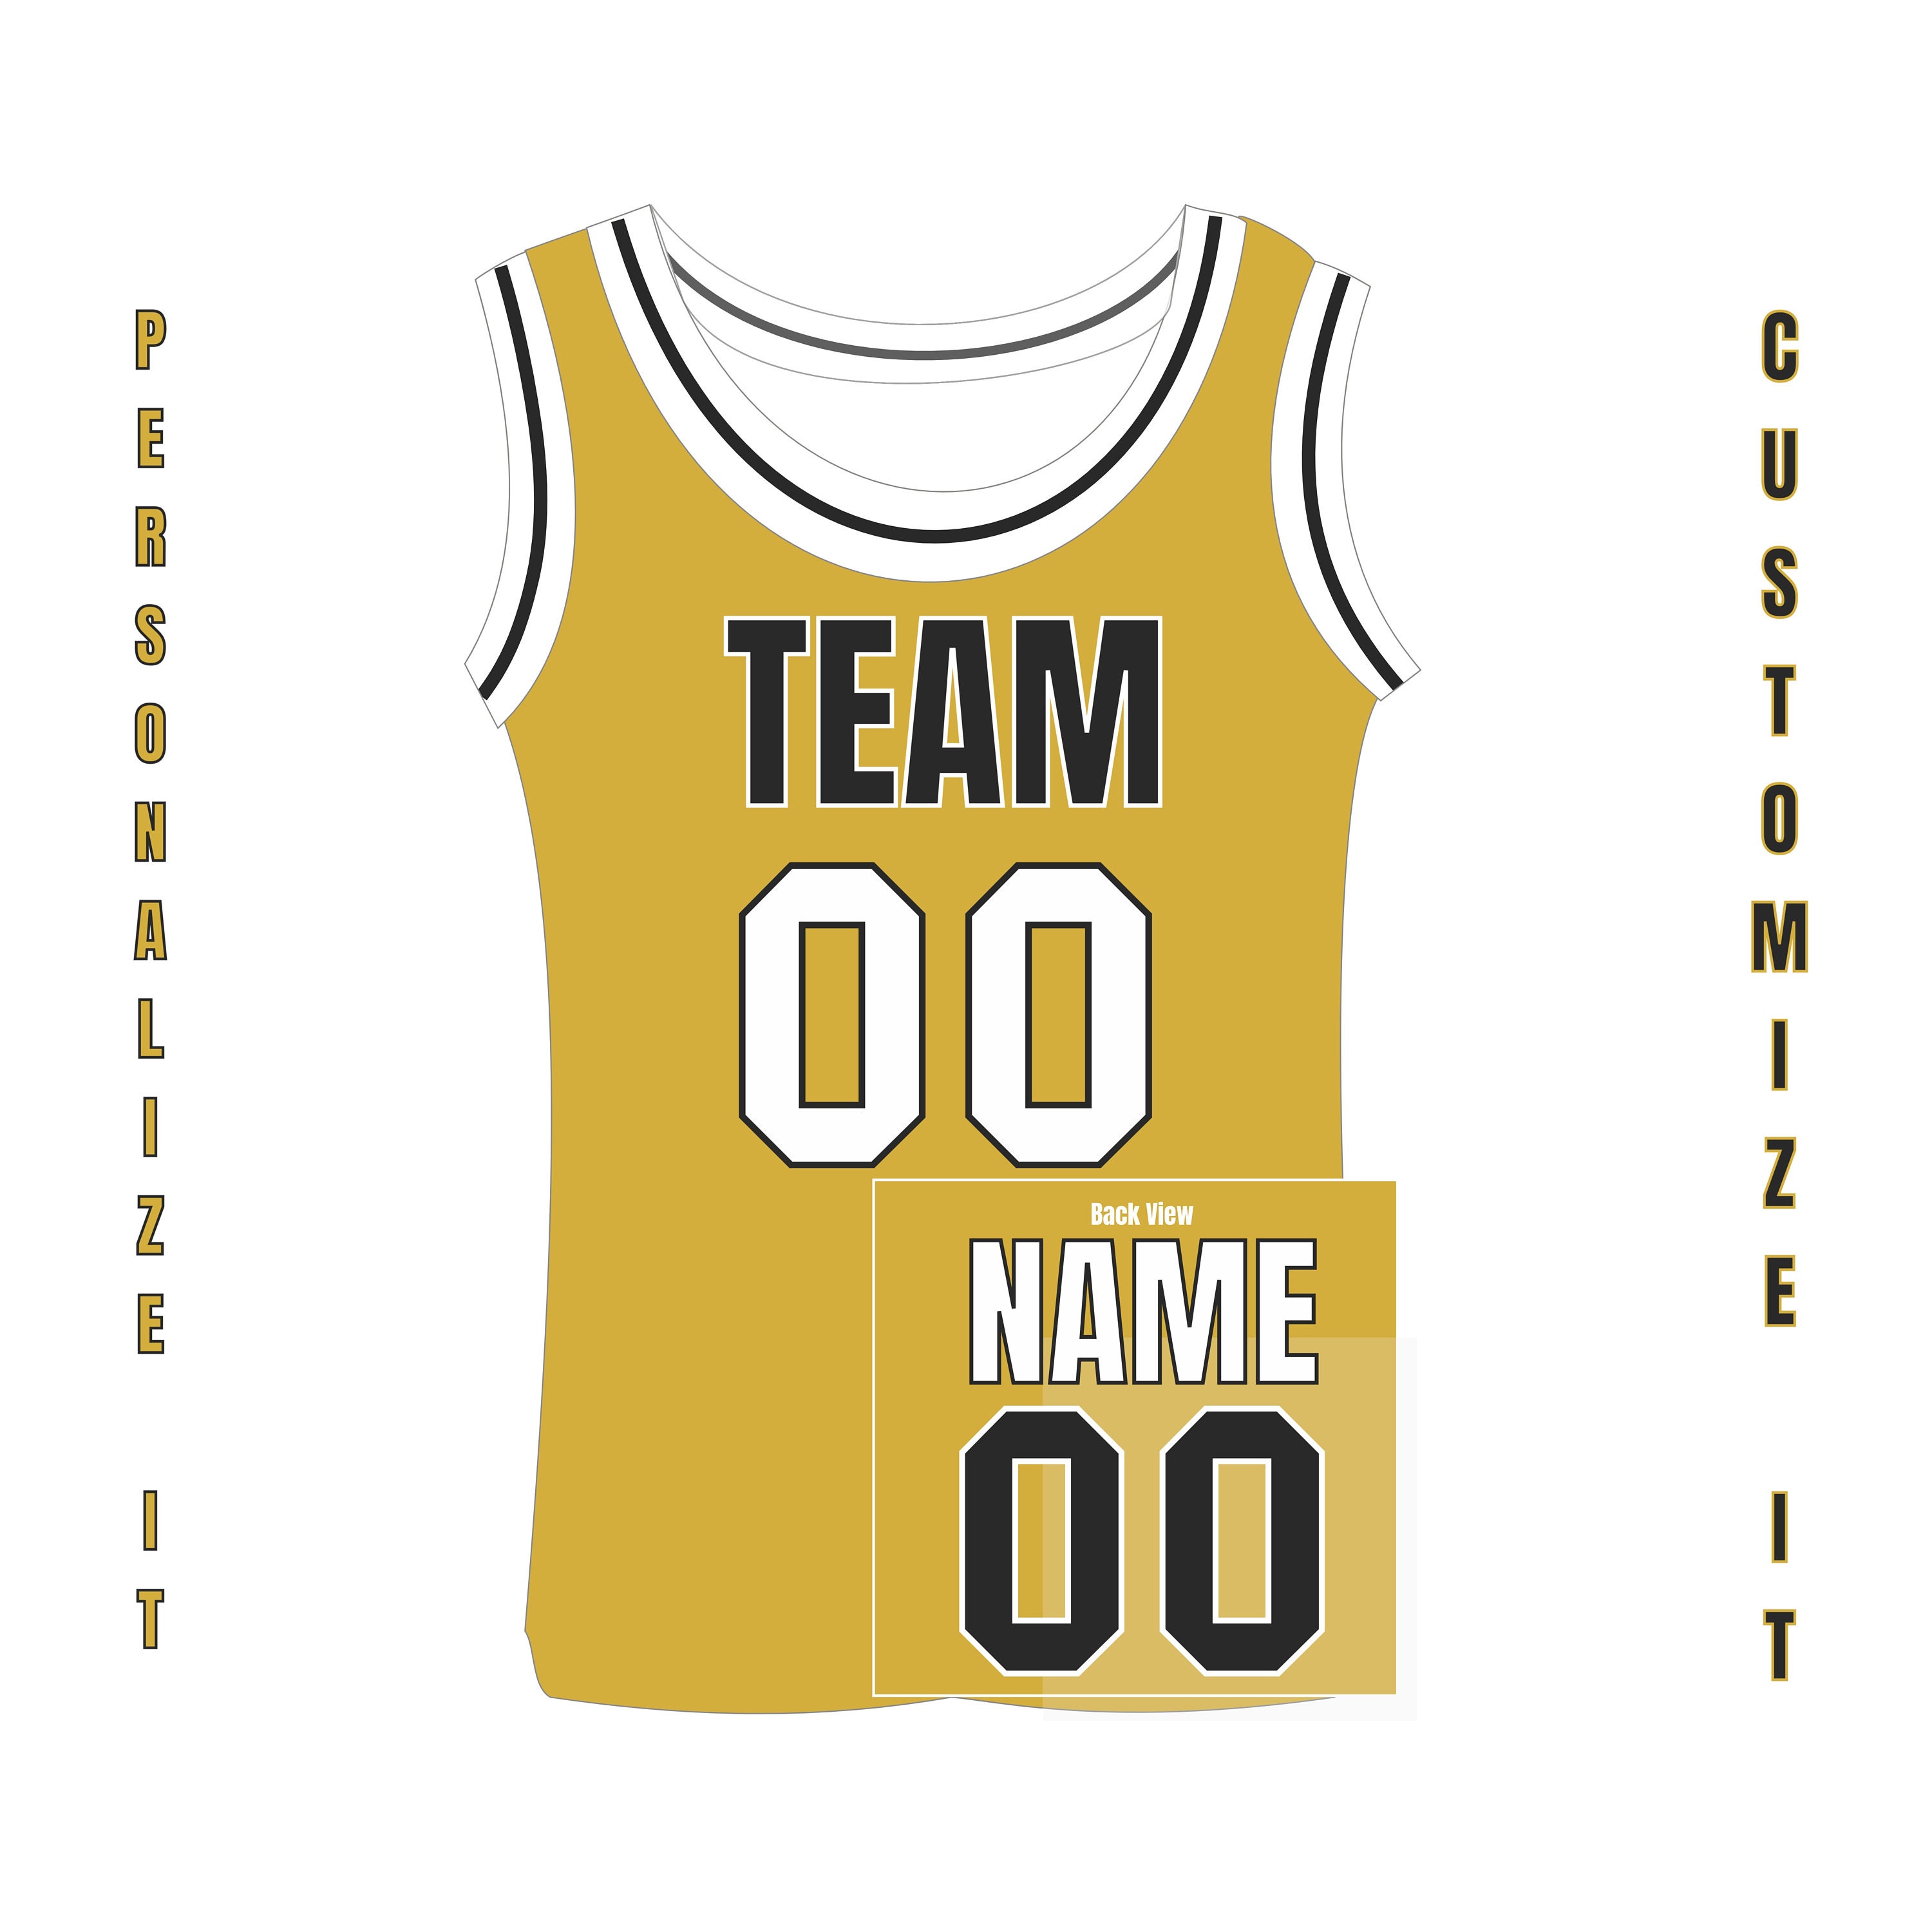 NEW BASKETBALL CHCAGO 31 DERRICK ROSE JERSEY FREE CUSTOMIZE OF NAME AND  NUMBER ONLY full sublimation high quality fabrics/ trending jersey